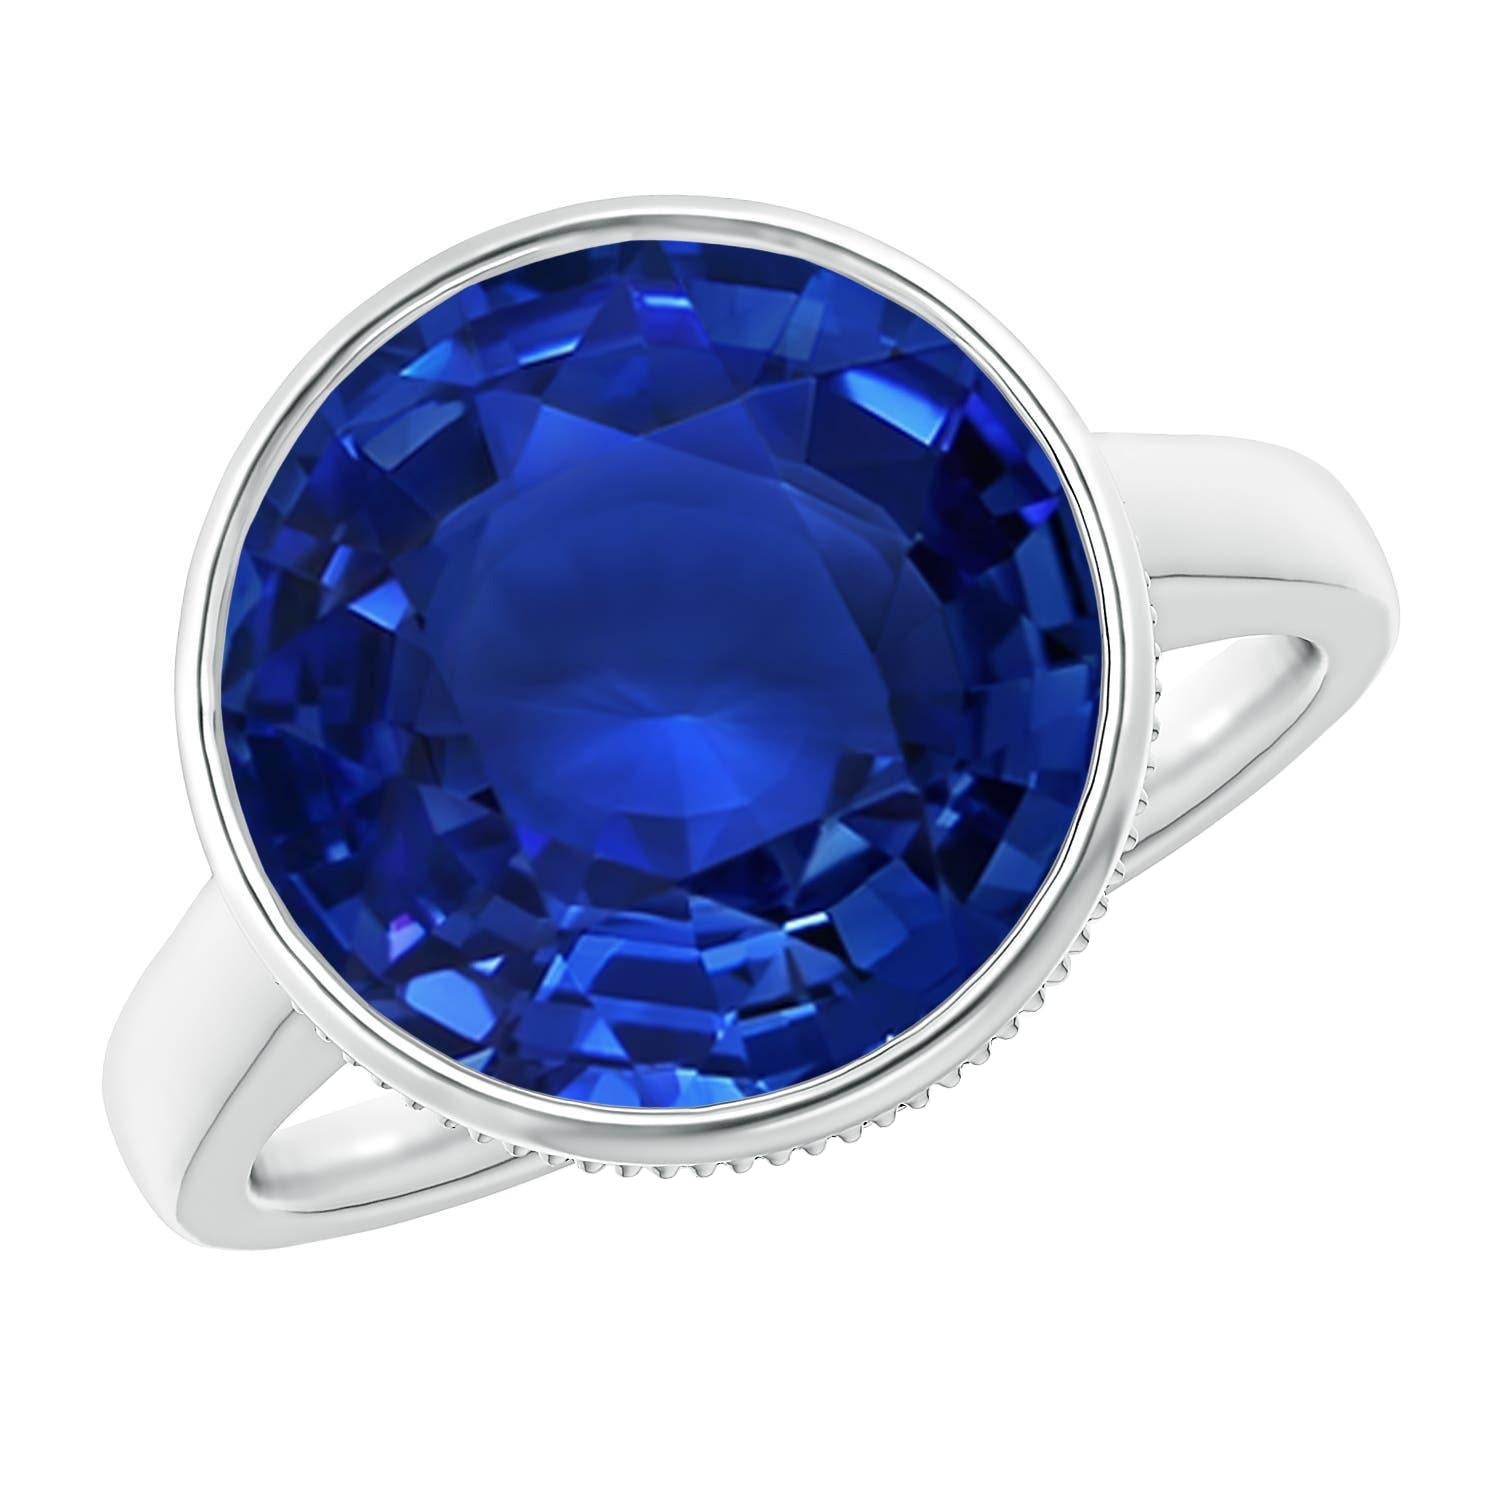 For Sale:  Angara GIA Certified Natural Ceylon Sapphire Solitaire Ring in White Gold